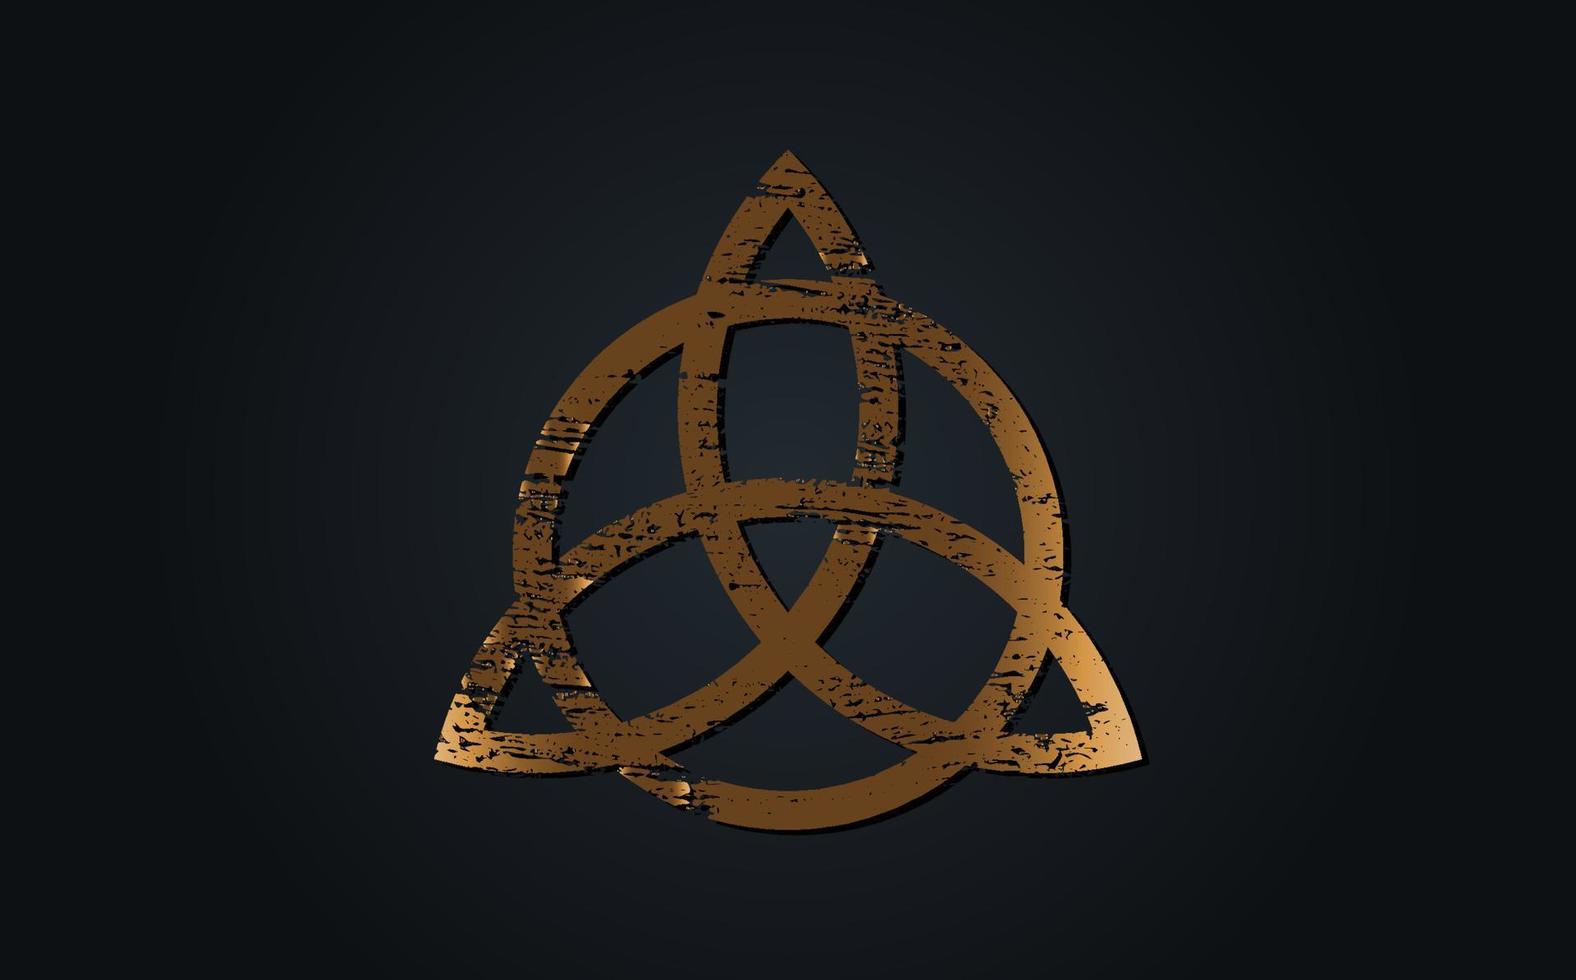 Gold Ancient Triquetra, Trinity Knot, Wiccan symbol for protection. Grunge Celtic old sign. Wiccan divination symbol, occult symbols, sacred geometry vector isolated on black background